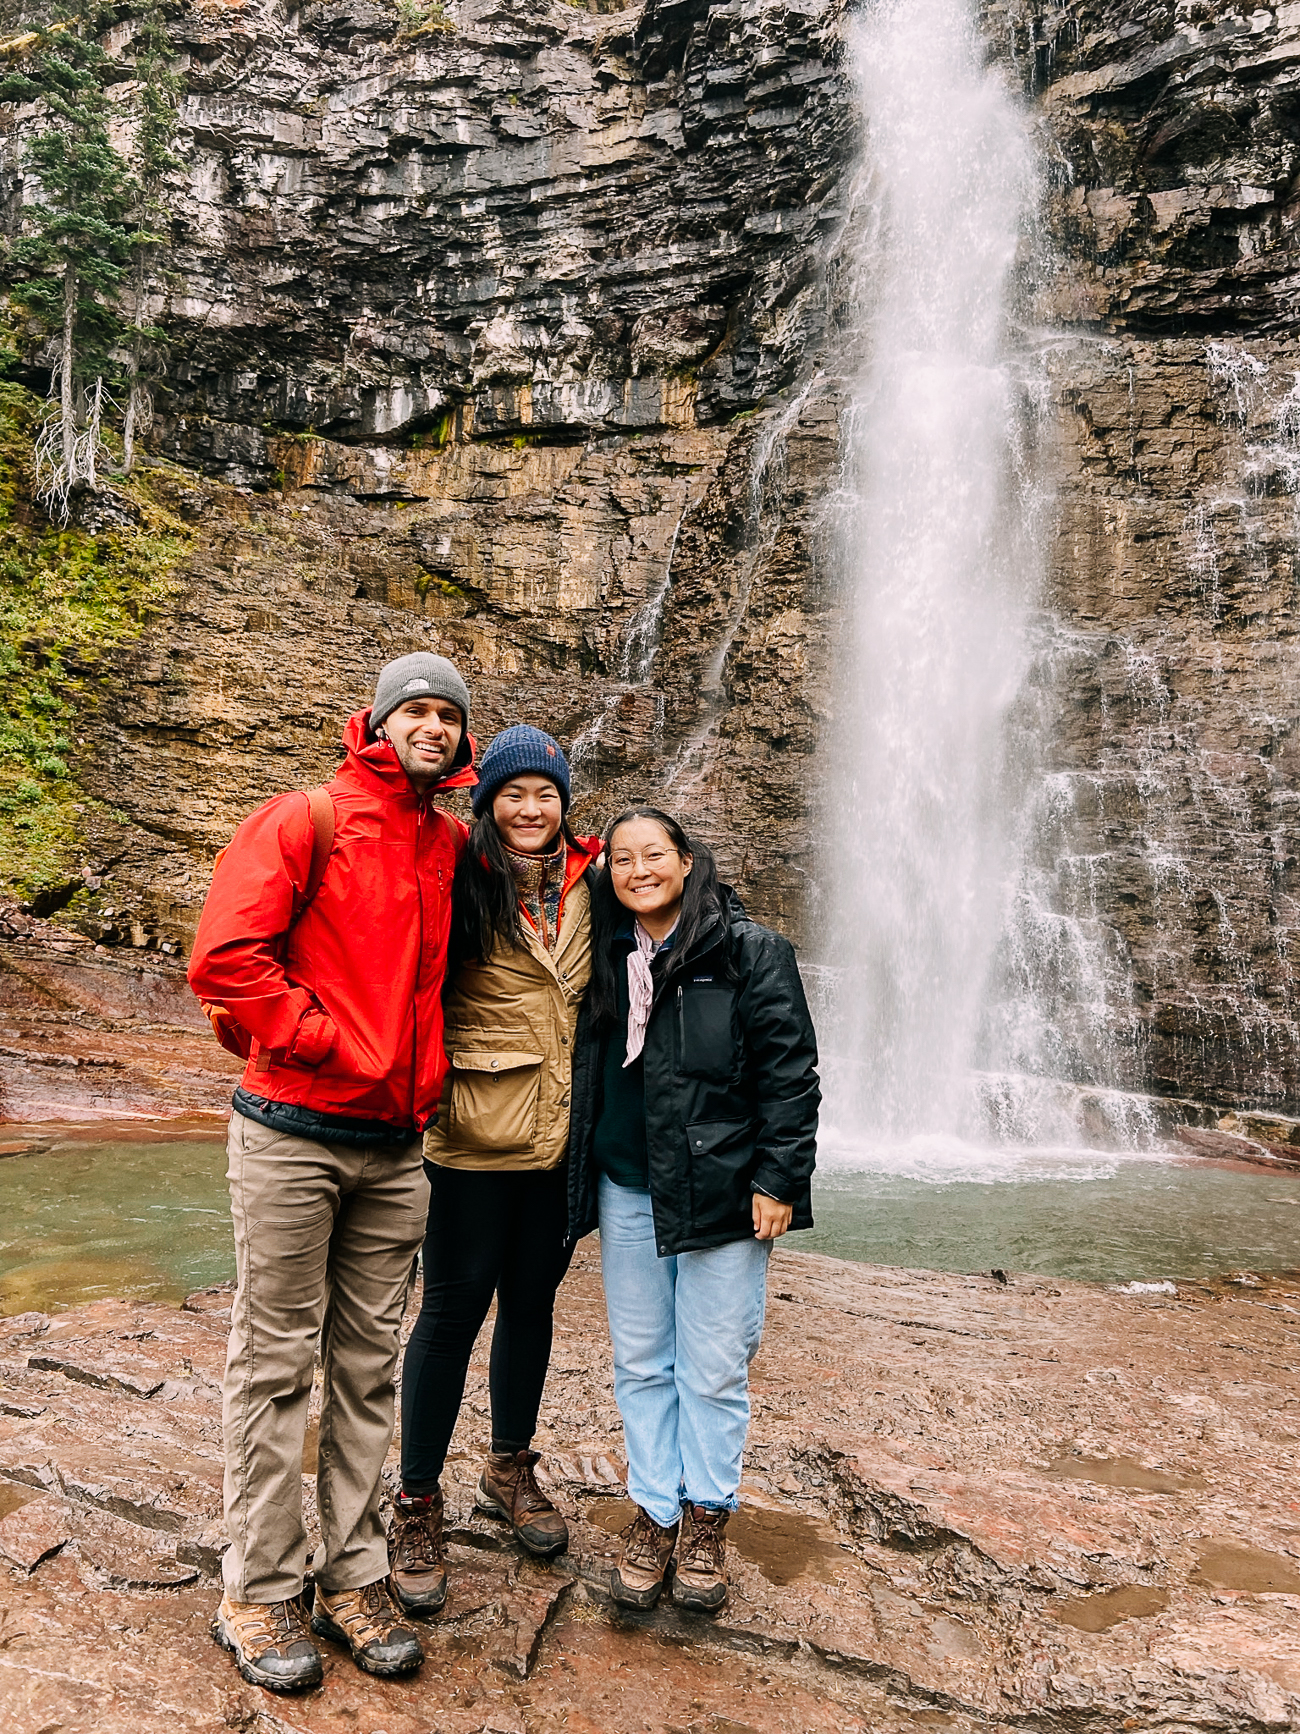 Justin, Sarah and Kaitlin in front of Virginia Falls